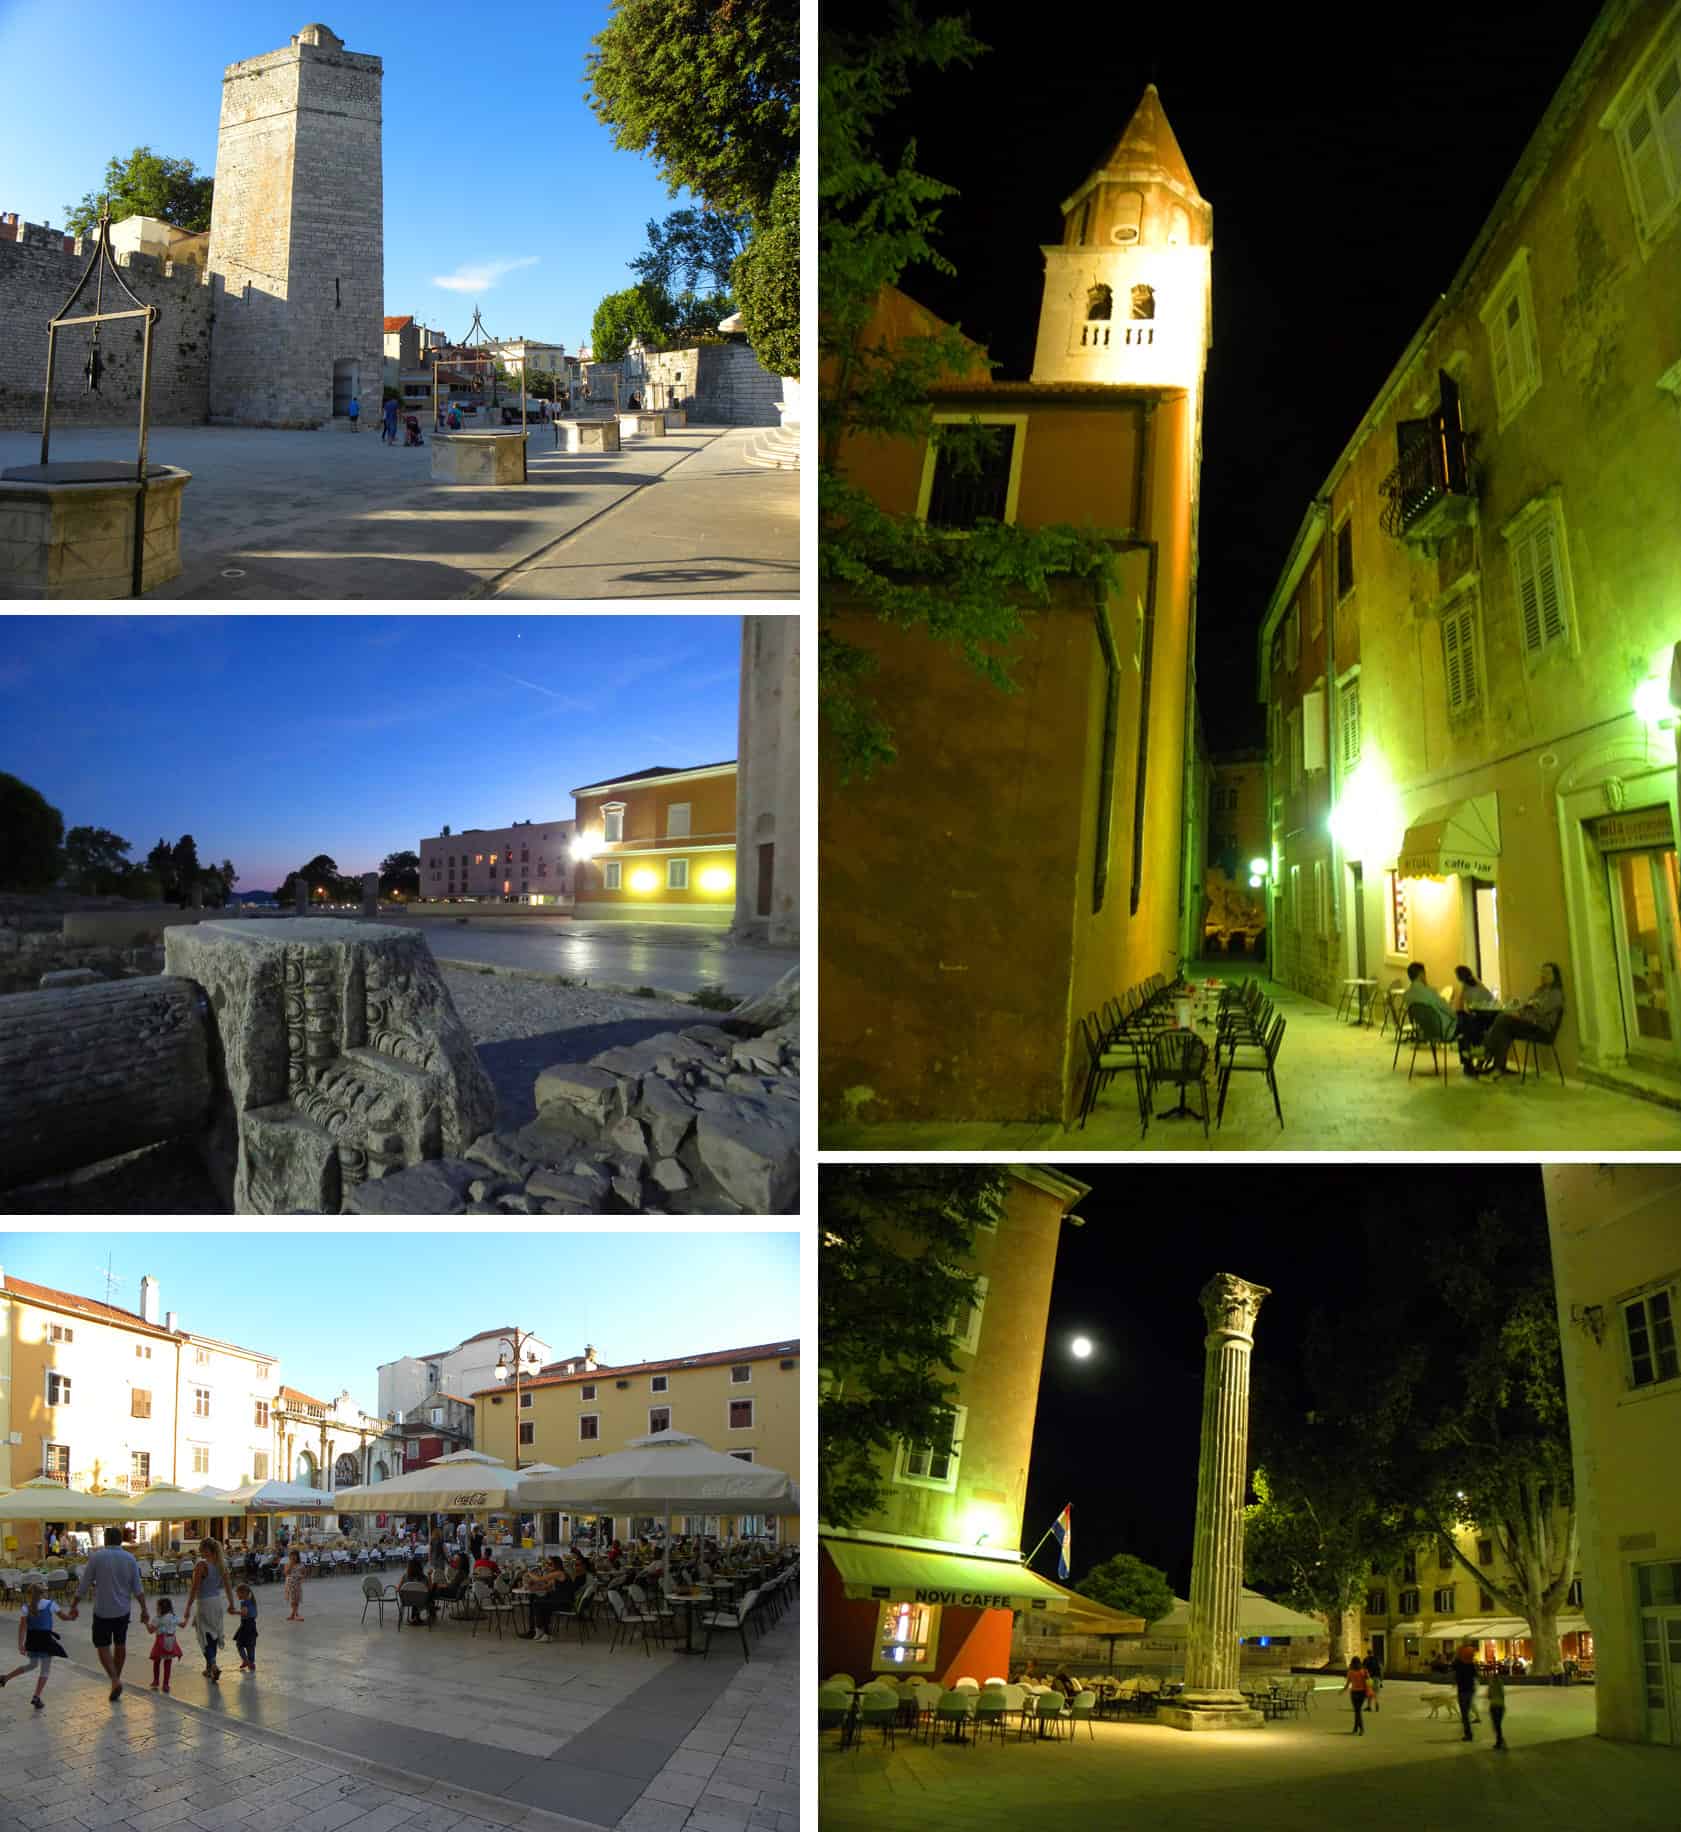 Why go to Zadar? Here’s why it’s worth a (short) visit